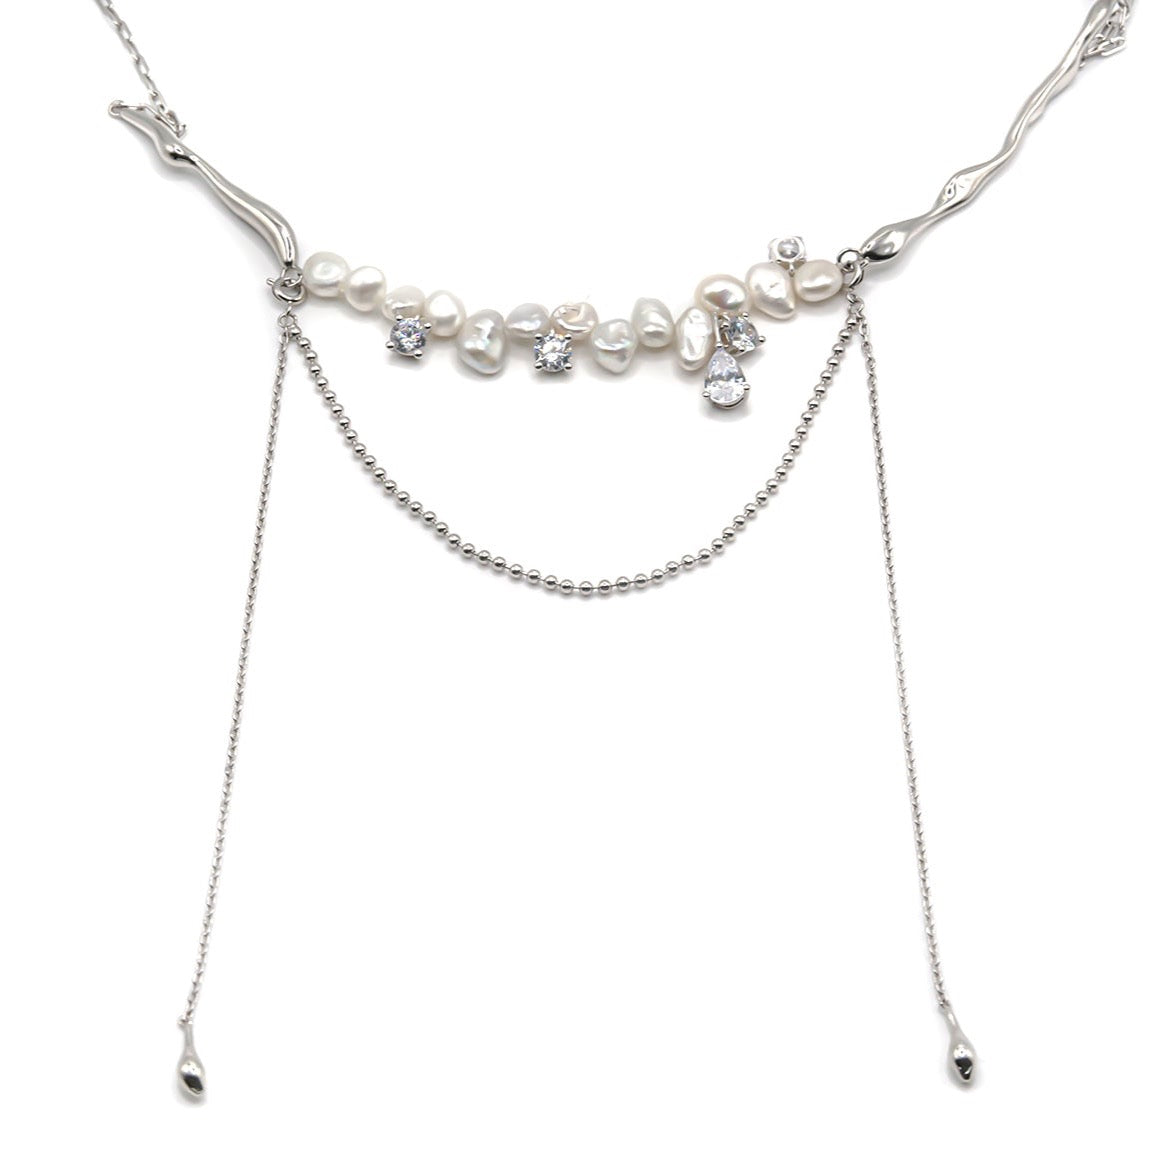 'Drifty Away' Textured Detachable Necklace - Sounder Wang - ALSOLIKE